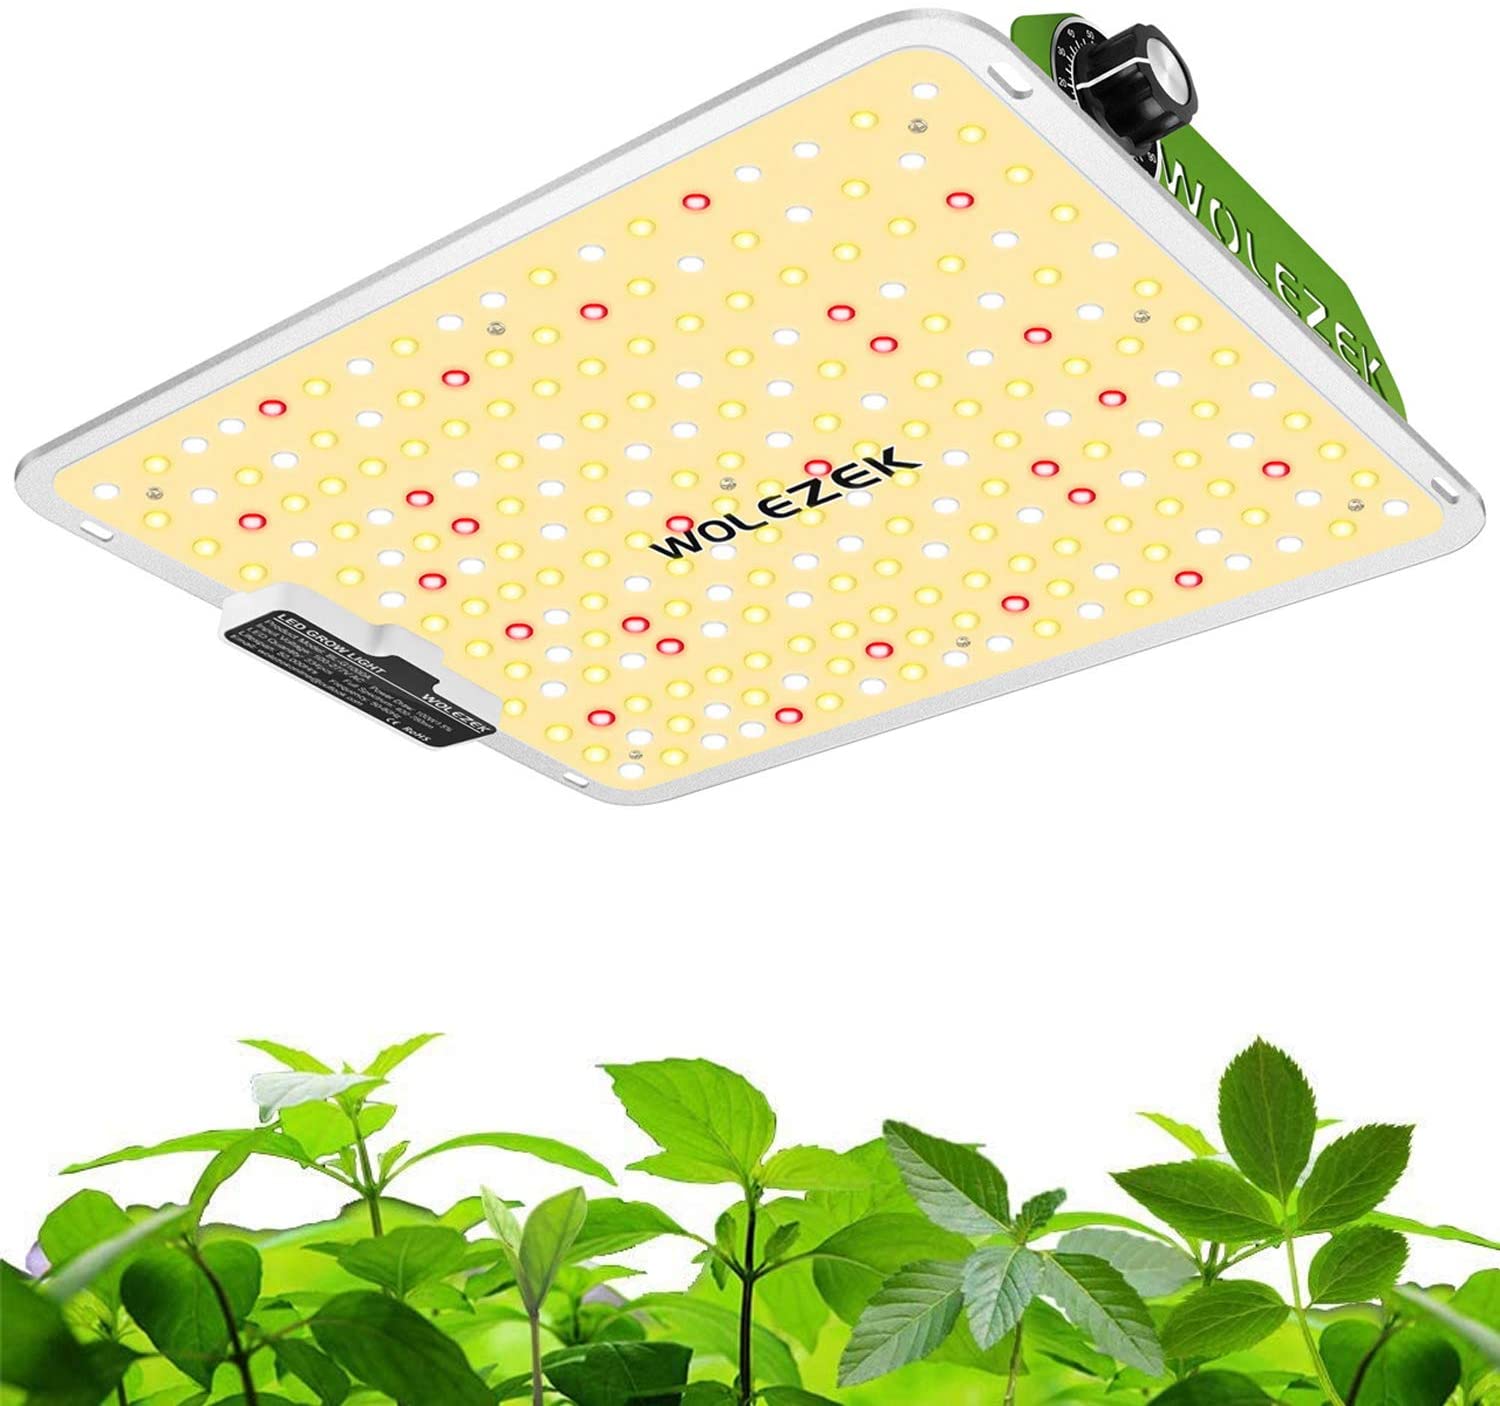 Wolezek G1000 Dimmable Samsung Diodes Sunlike Full Spectrum LED Grow Light